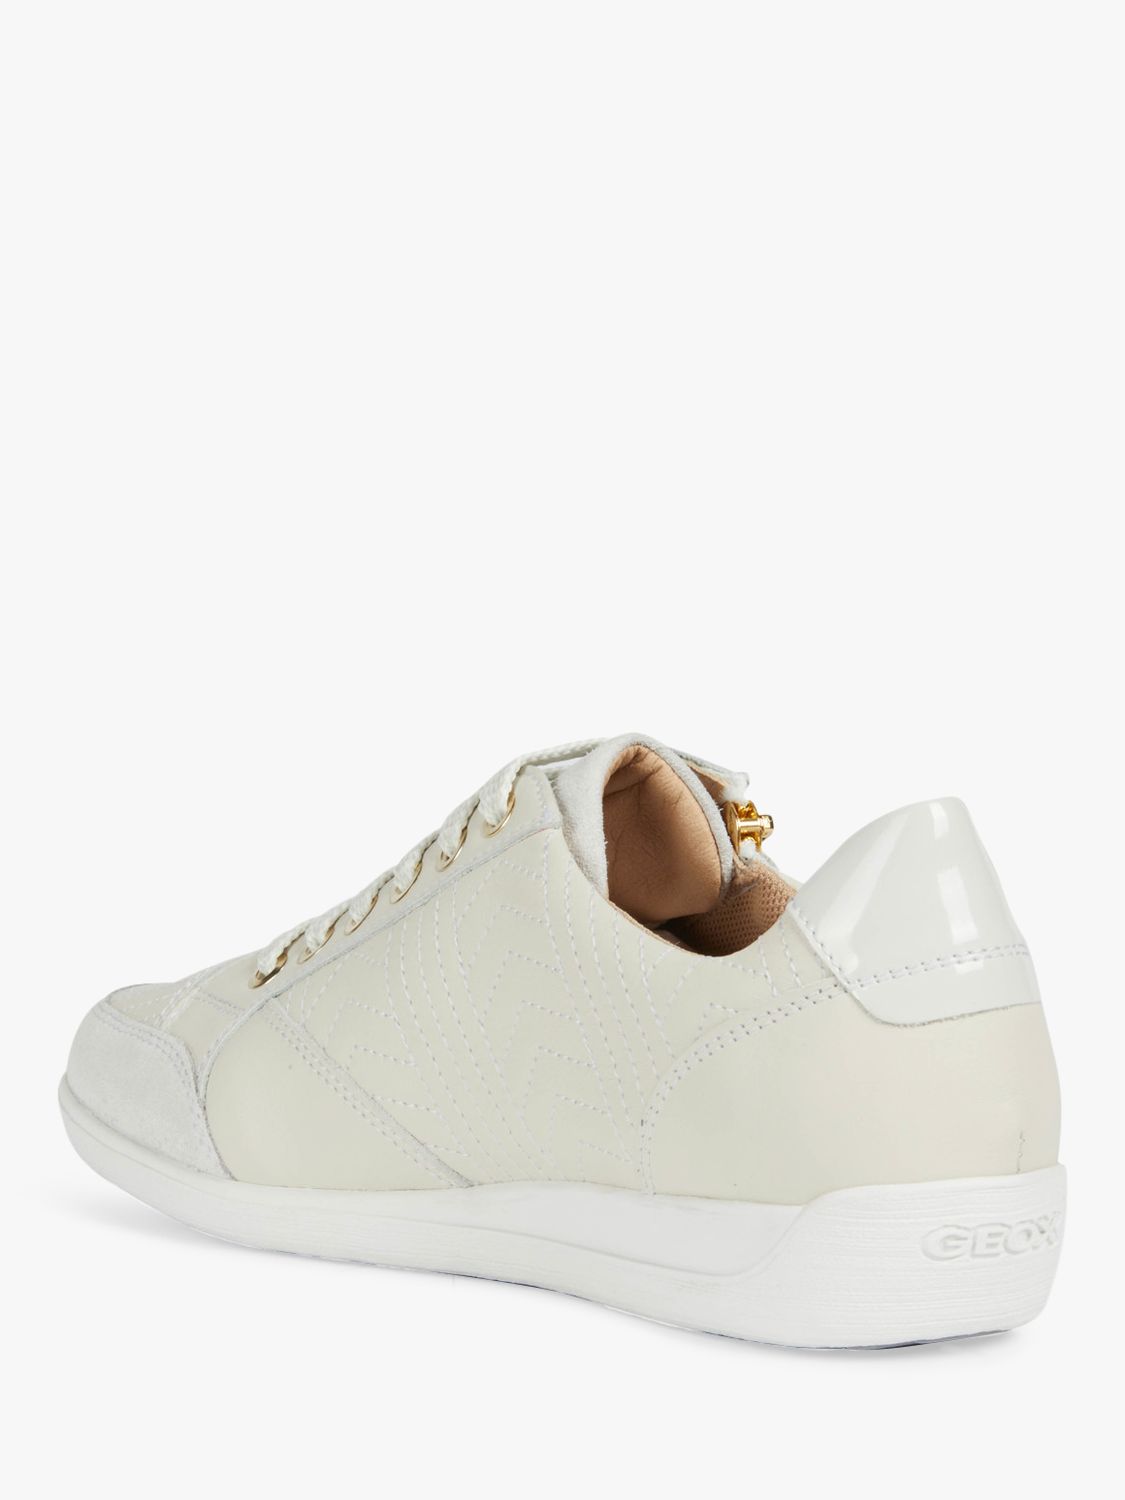 Geox Women's Myria Zip Detail Trainers, Off White at John Lewis & Partners